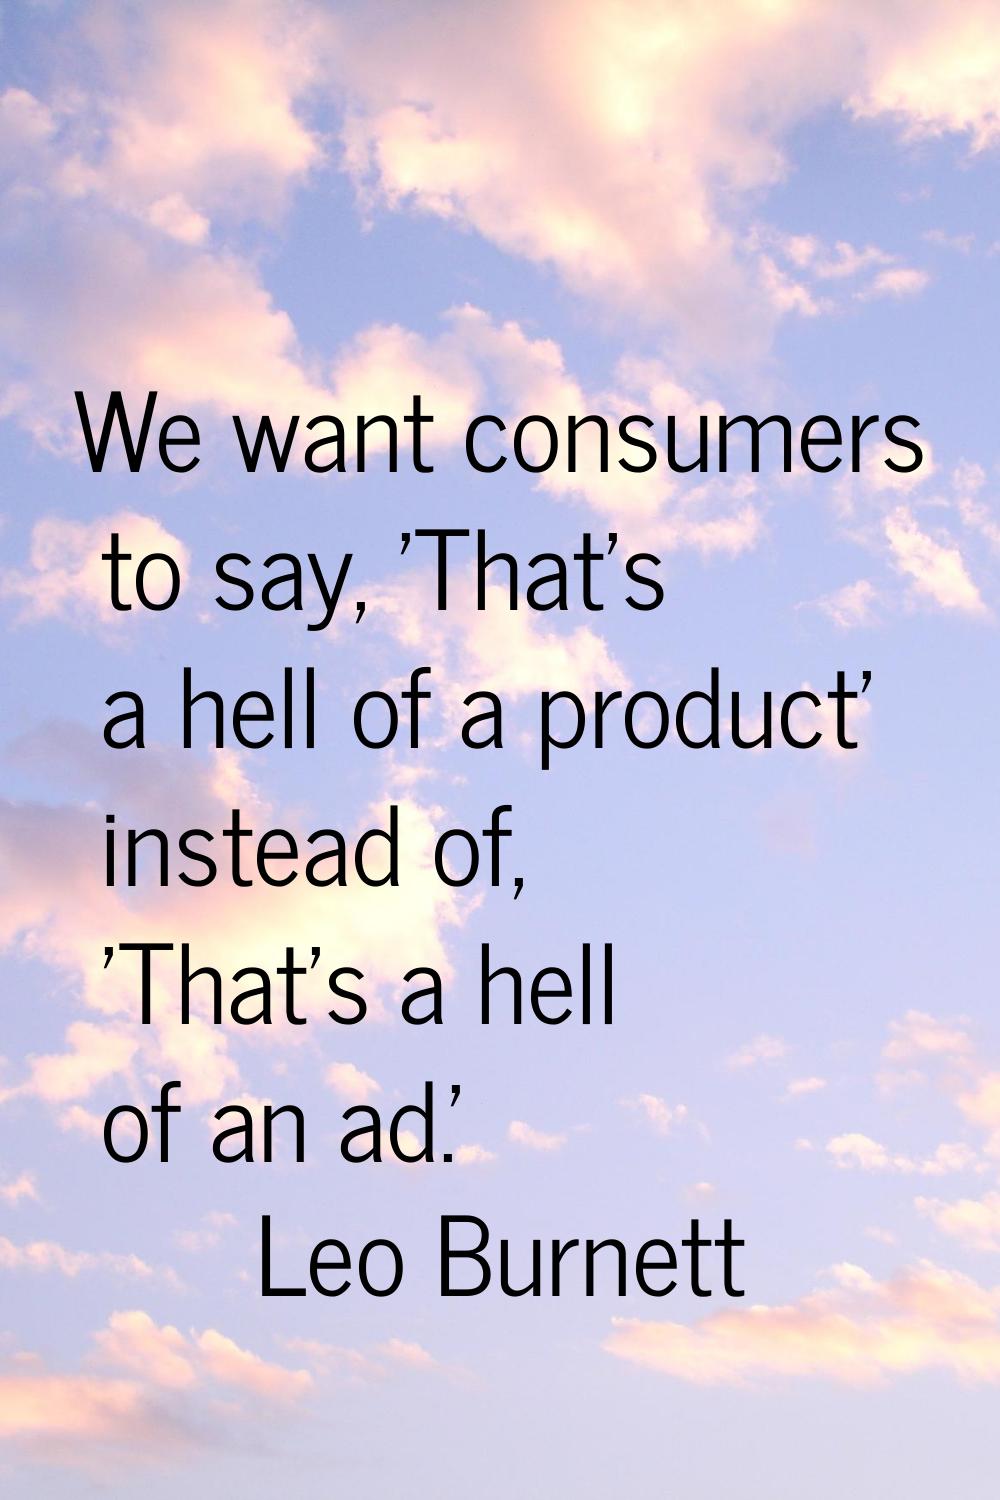 We want consumers to say, 'That's a hell of a product' instead of, 'That's a hell of an ad.'